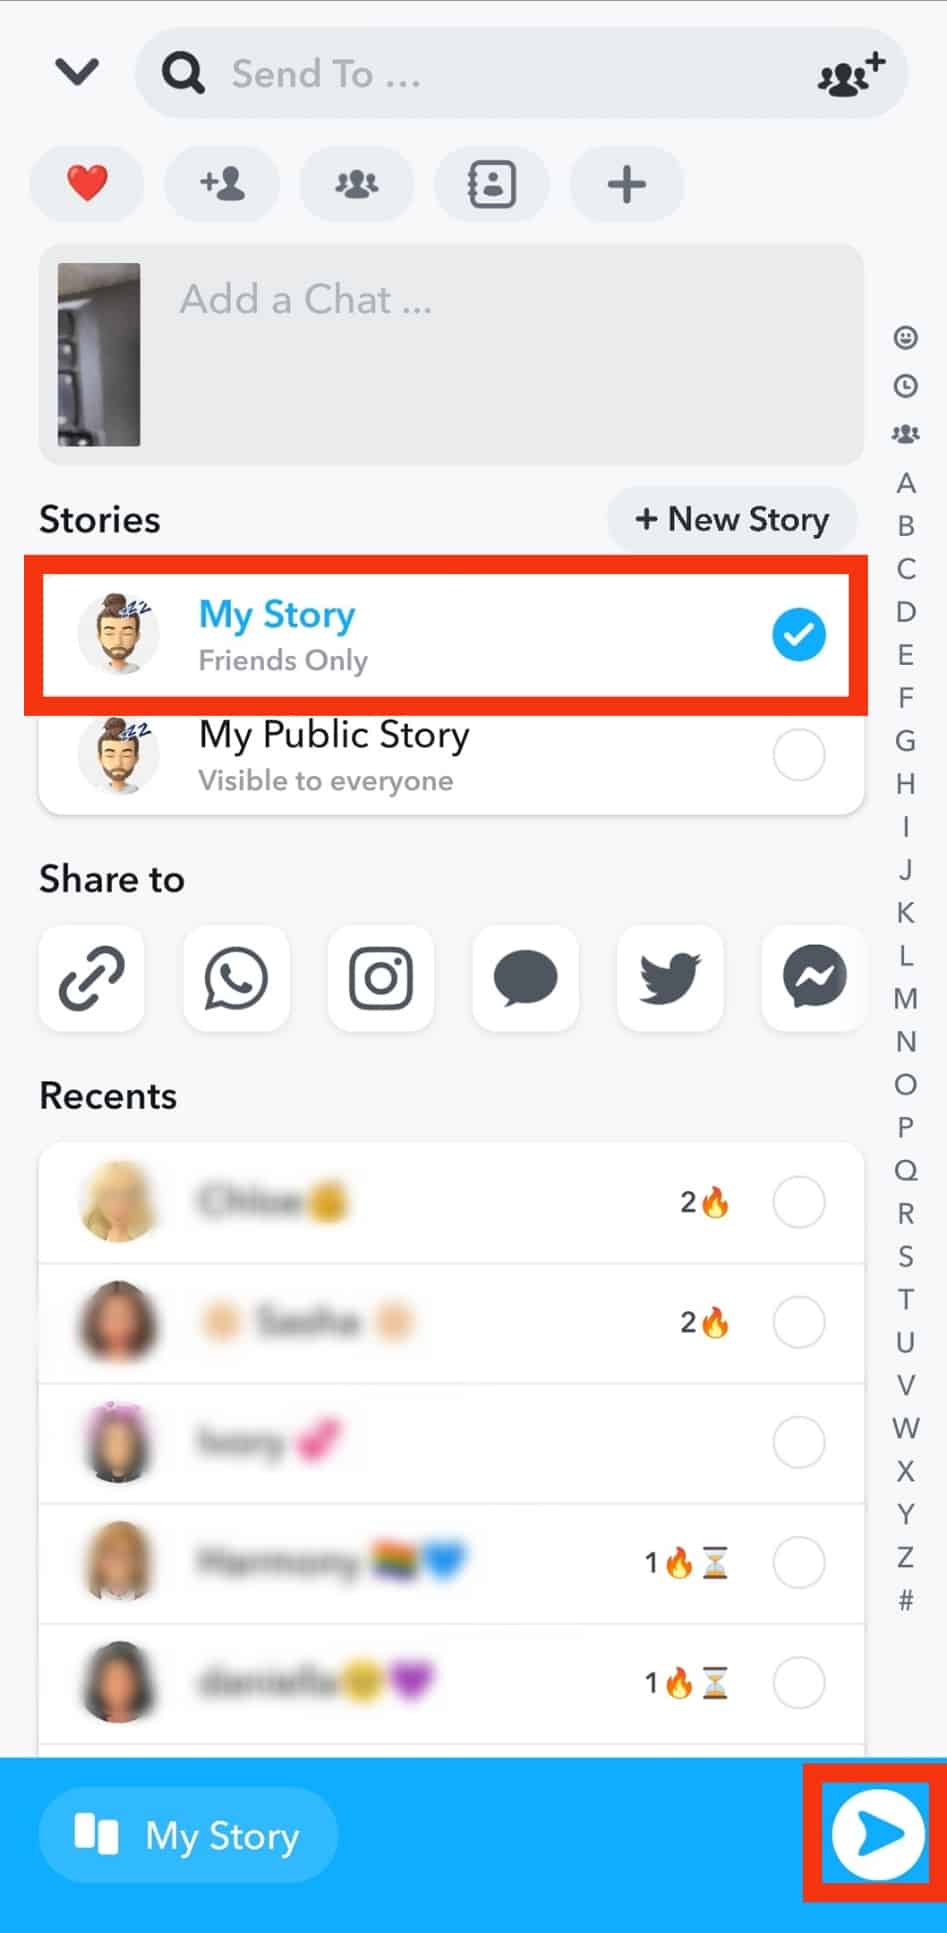 Select The “My Story” Option And Tap The Arrow Icon